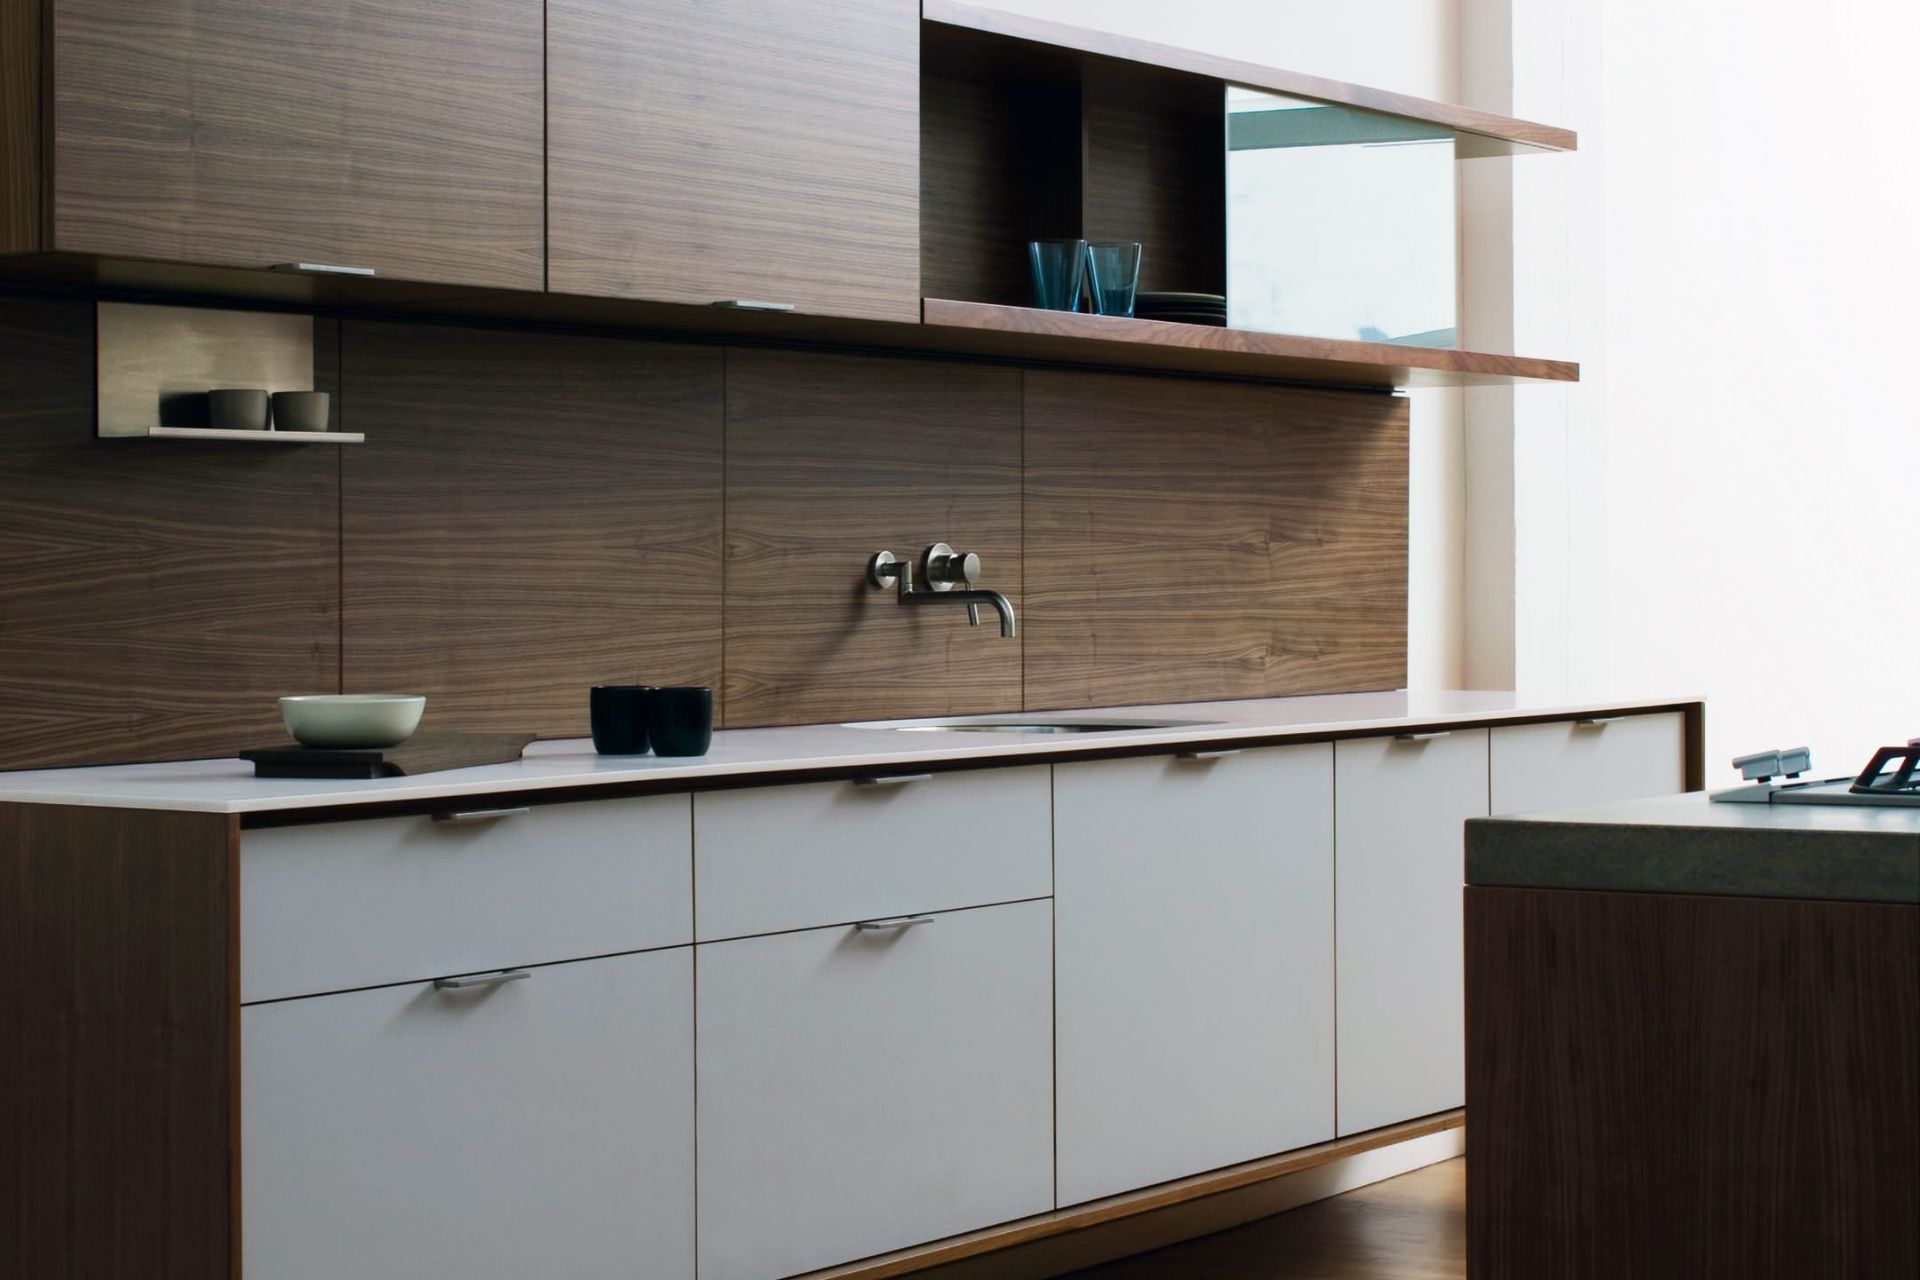 Floating Kitchen Cabinets: A Comprehensive Guide for Homeowners